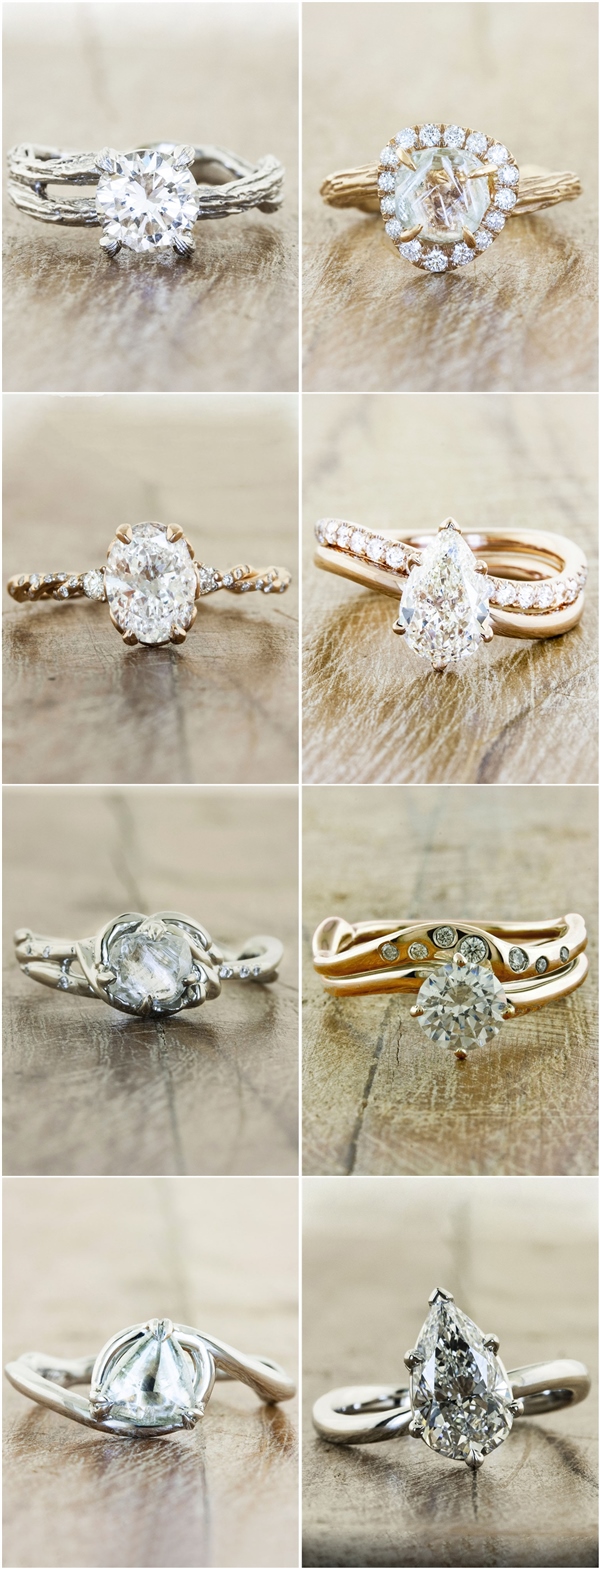 Vintage Engagement Rings and Wedding Rings from Ken & Dana Design